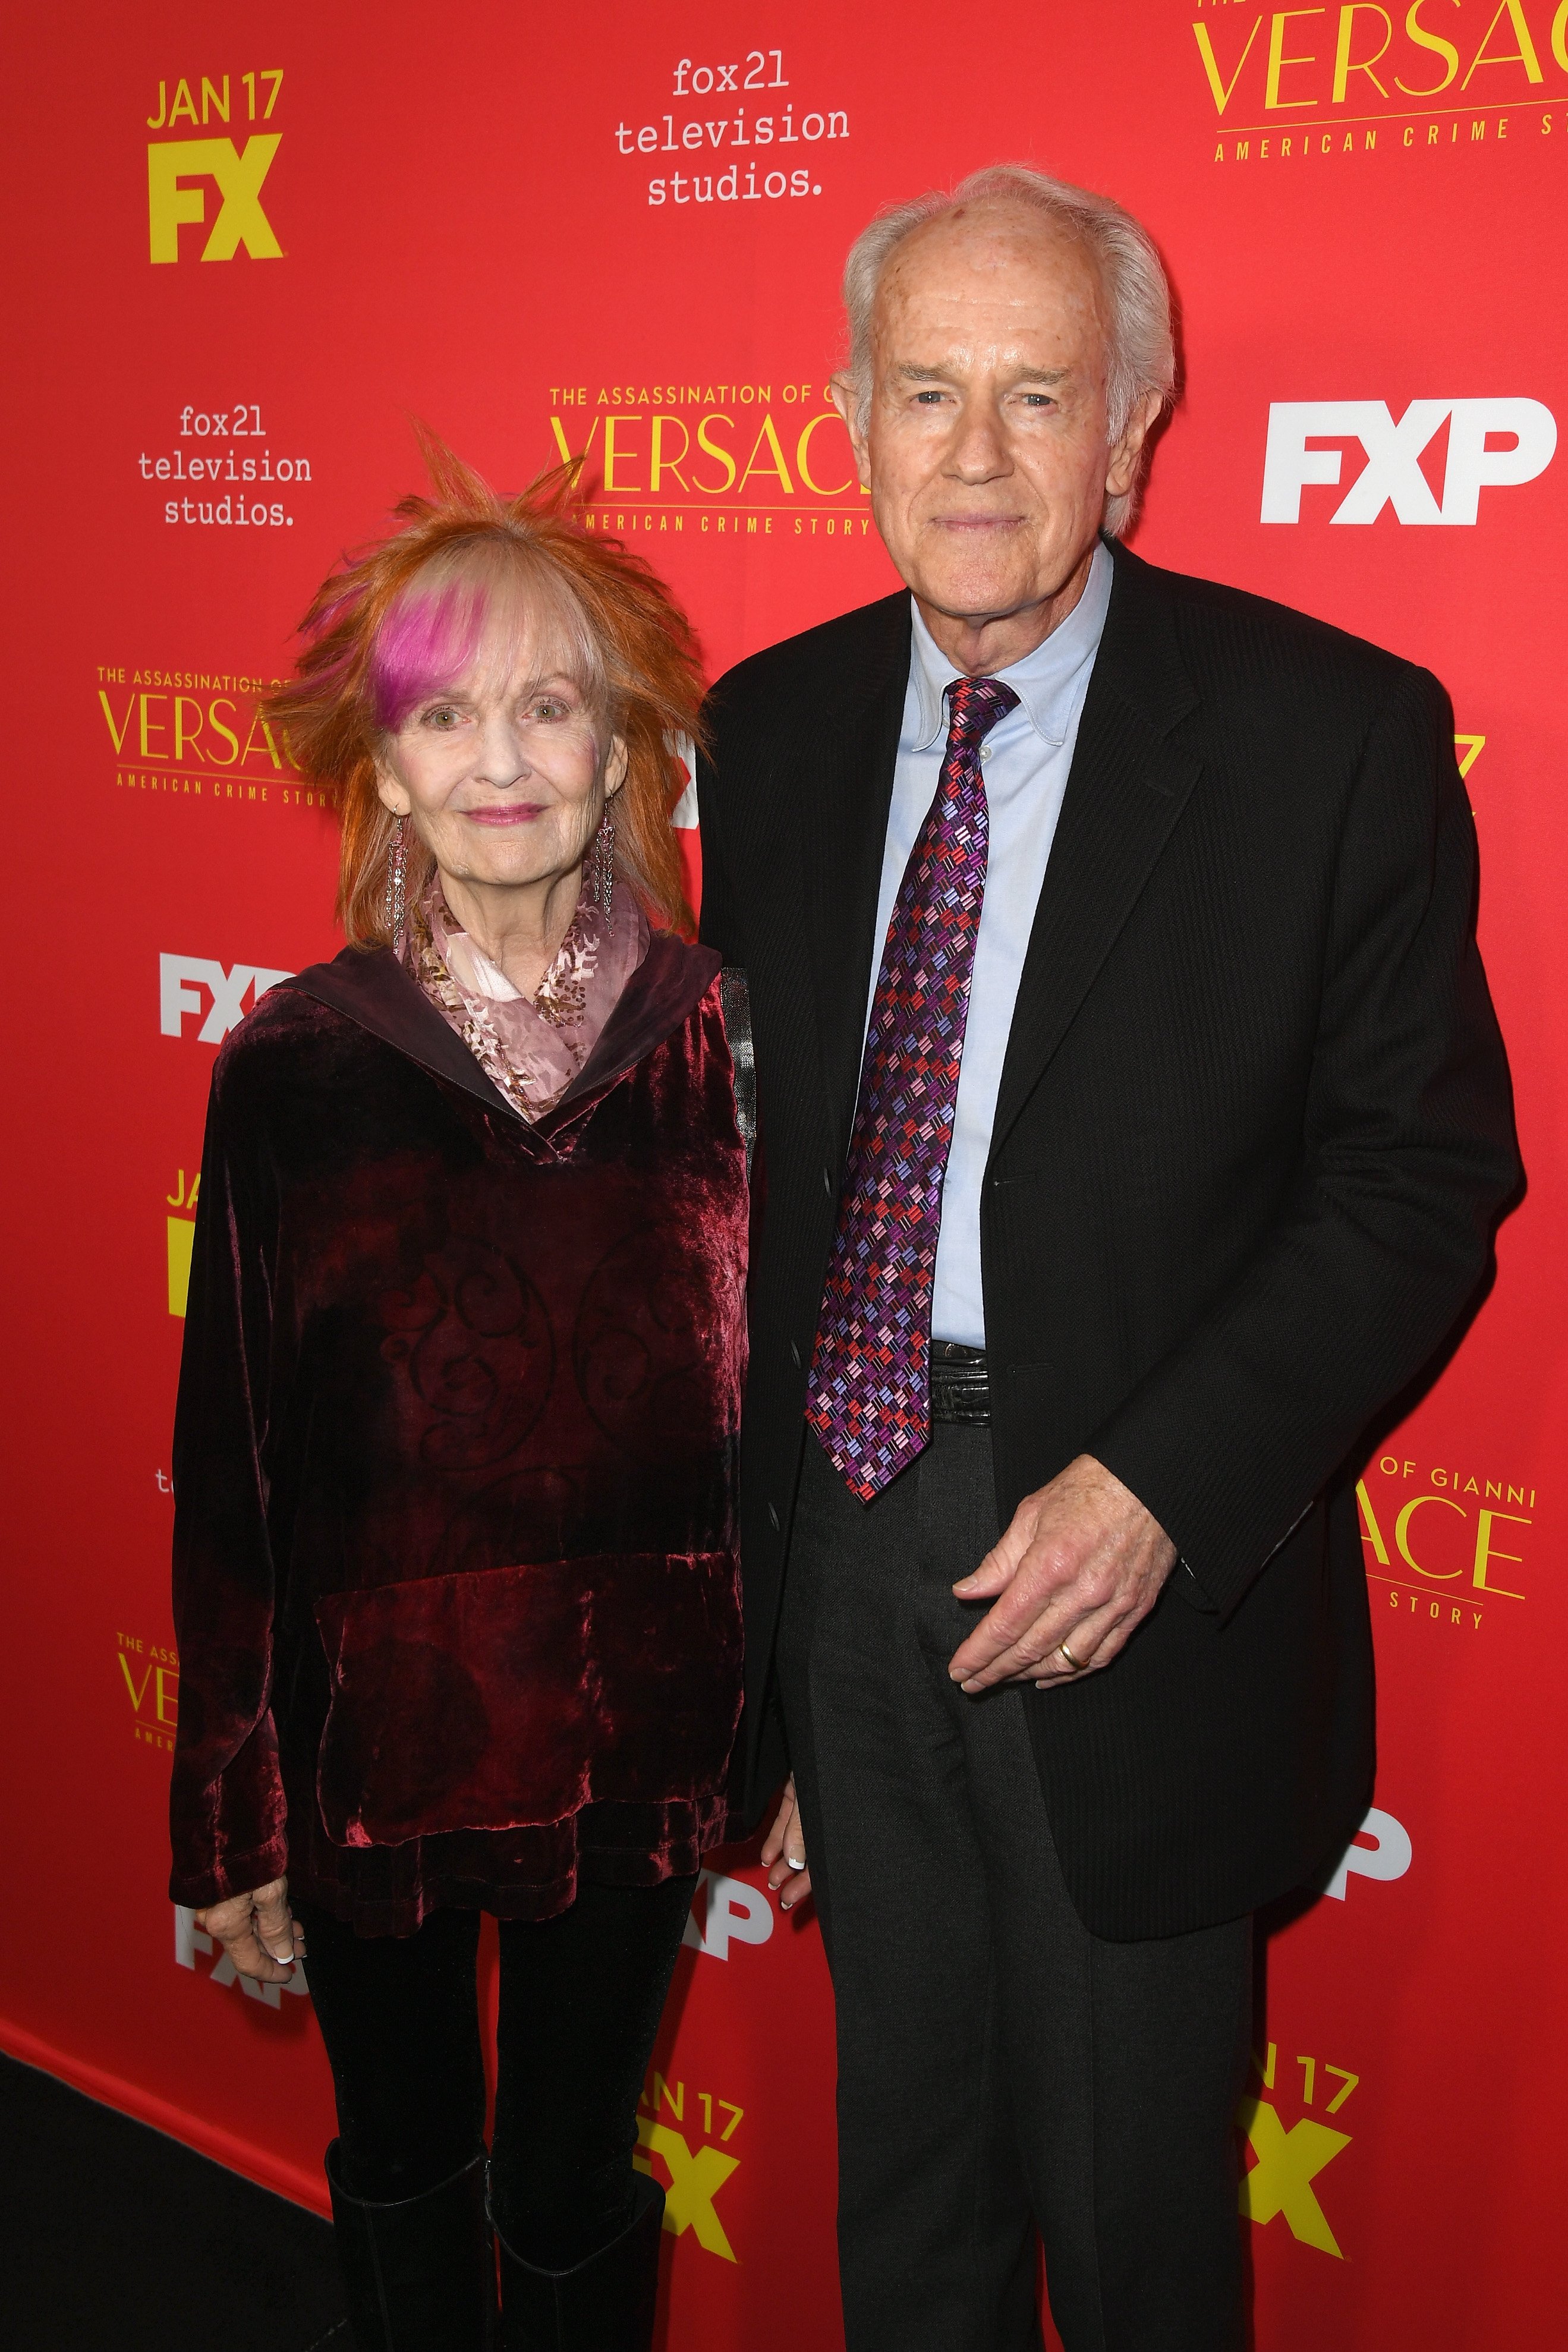 Judy Farrell and actor Mike Farrell during the premiere of "The Assassination Of Gianni Versace: American Crime Story" at ArcLight Hollywood on January 8, 2018 in Hollywood, California. | Source: Getty Images